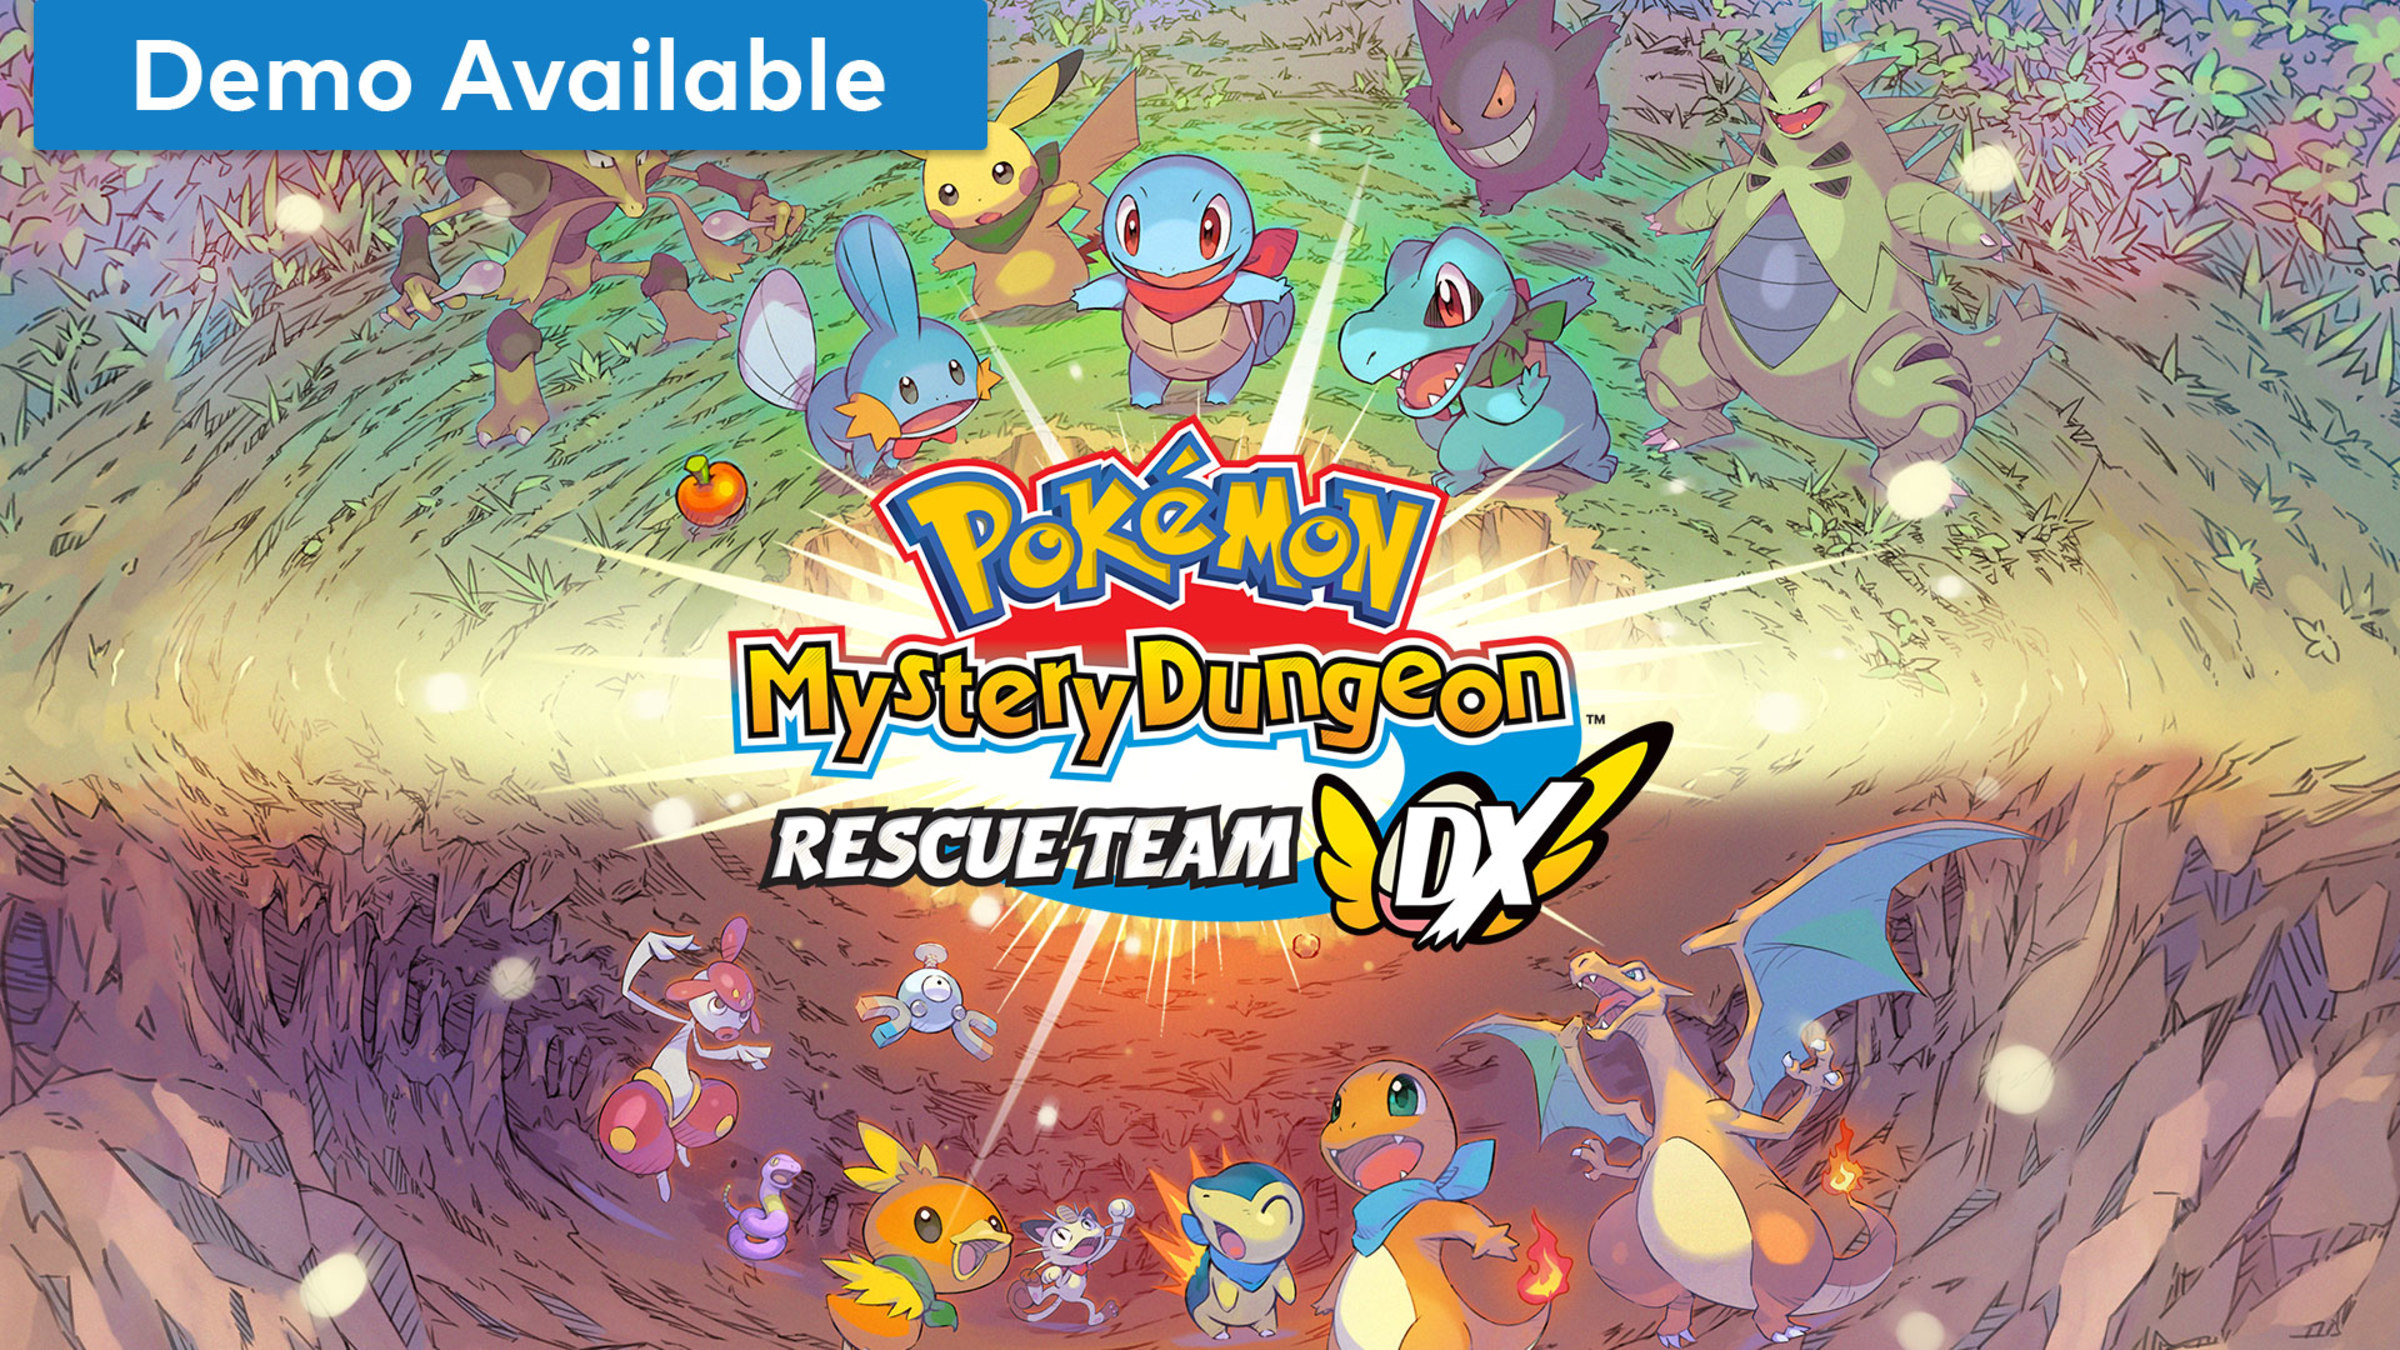 Pokémon Mystery Dungeon™: Rescue Team DX for Nintendo Switch - Nintendo  Official Site